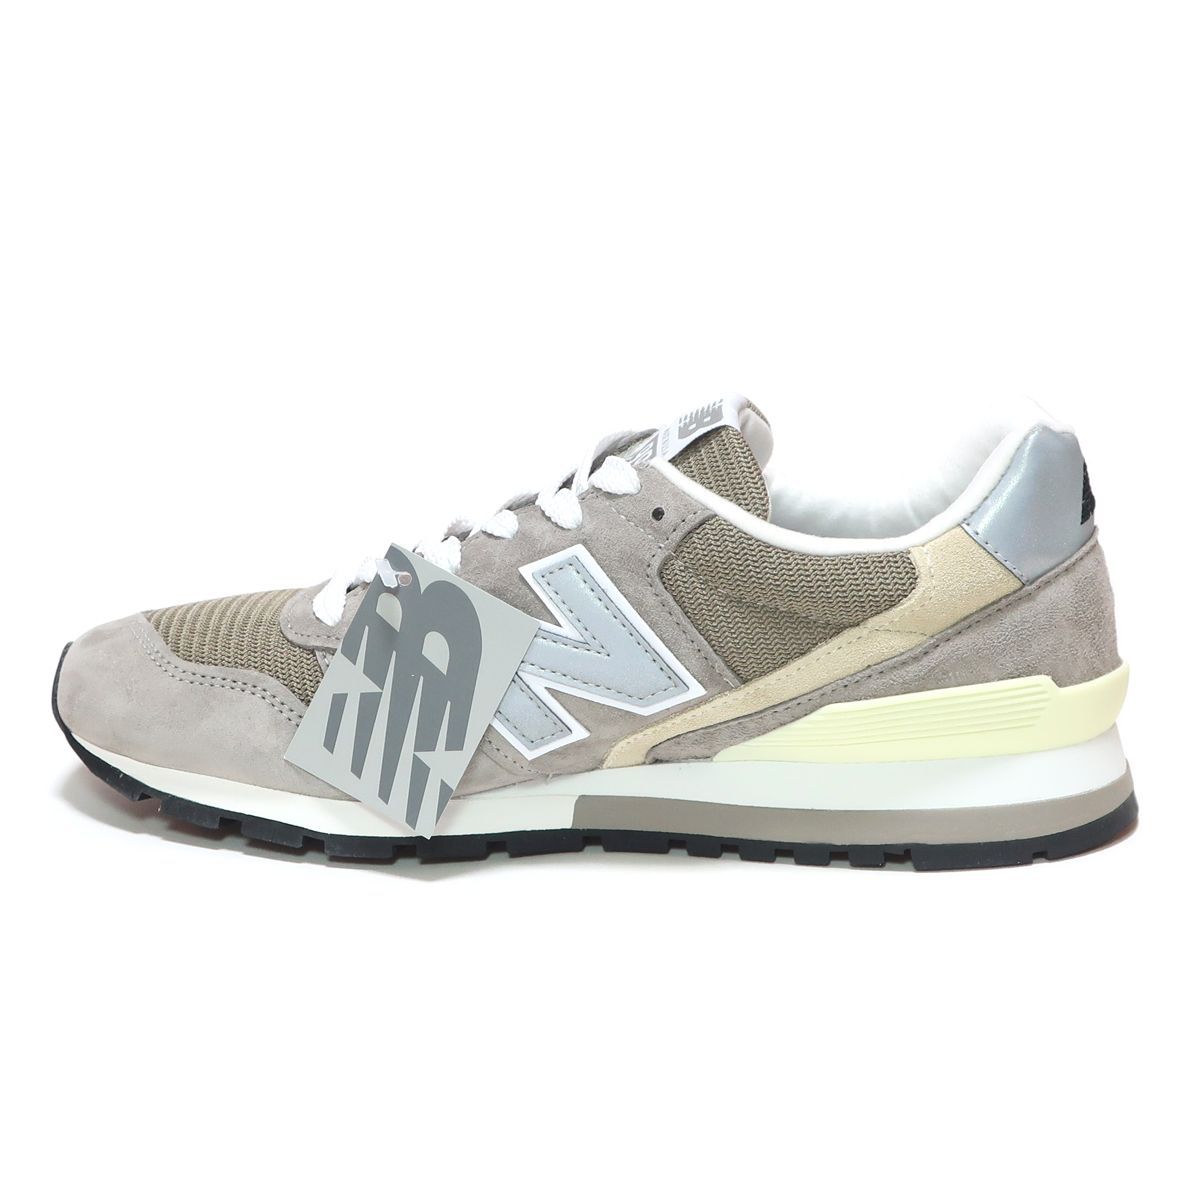 NEW BALANCE U996GR GRAY GREY SUEDE MADE IN USA ( ニューバランス 996 グレー スエード アメリカ製  )